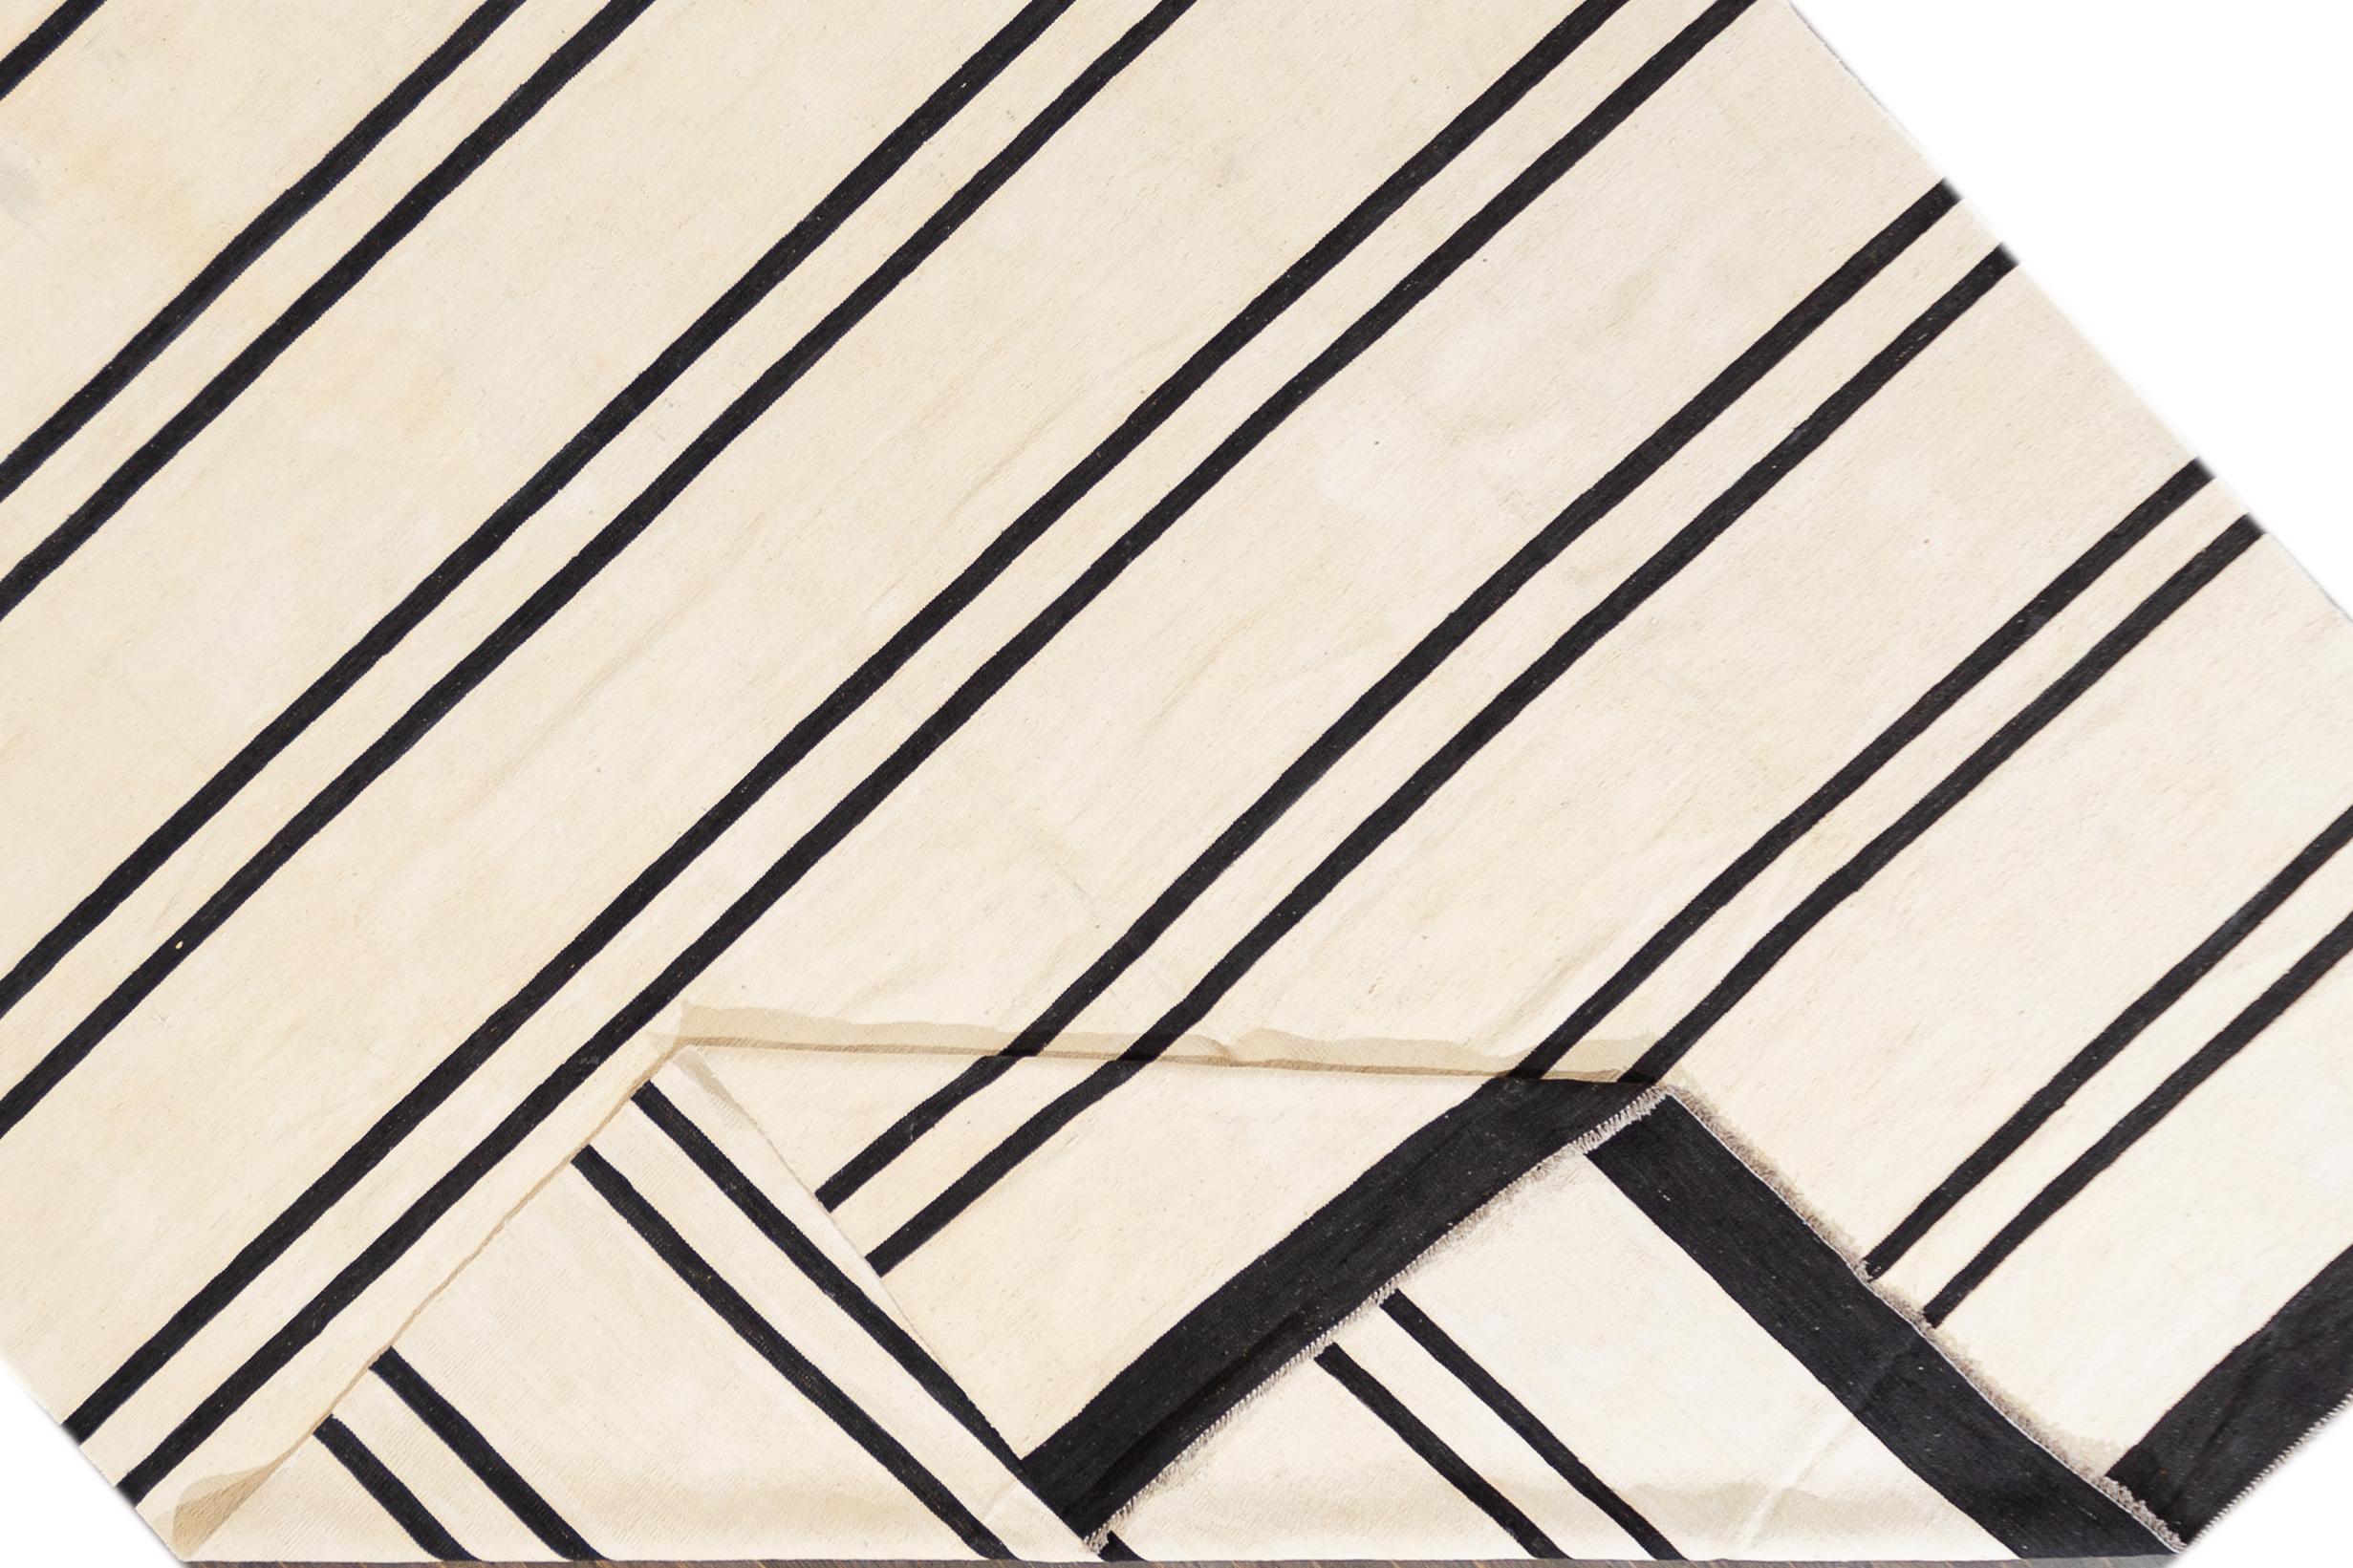 A contemporary black and white striped Kilim rug. This hand-woven flatweave wool rug measures 10'4